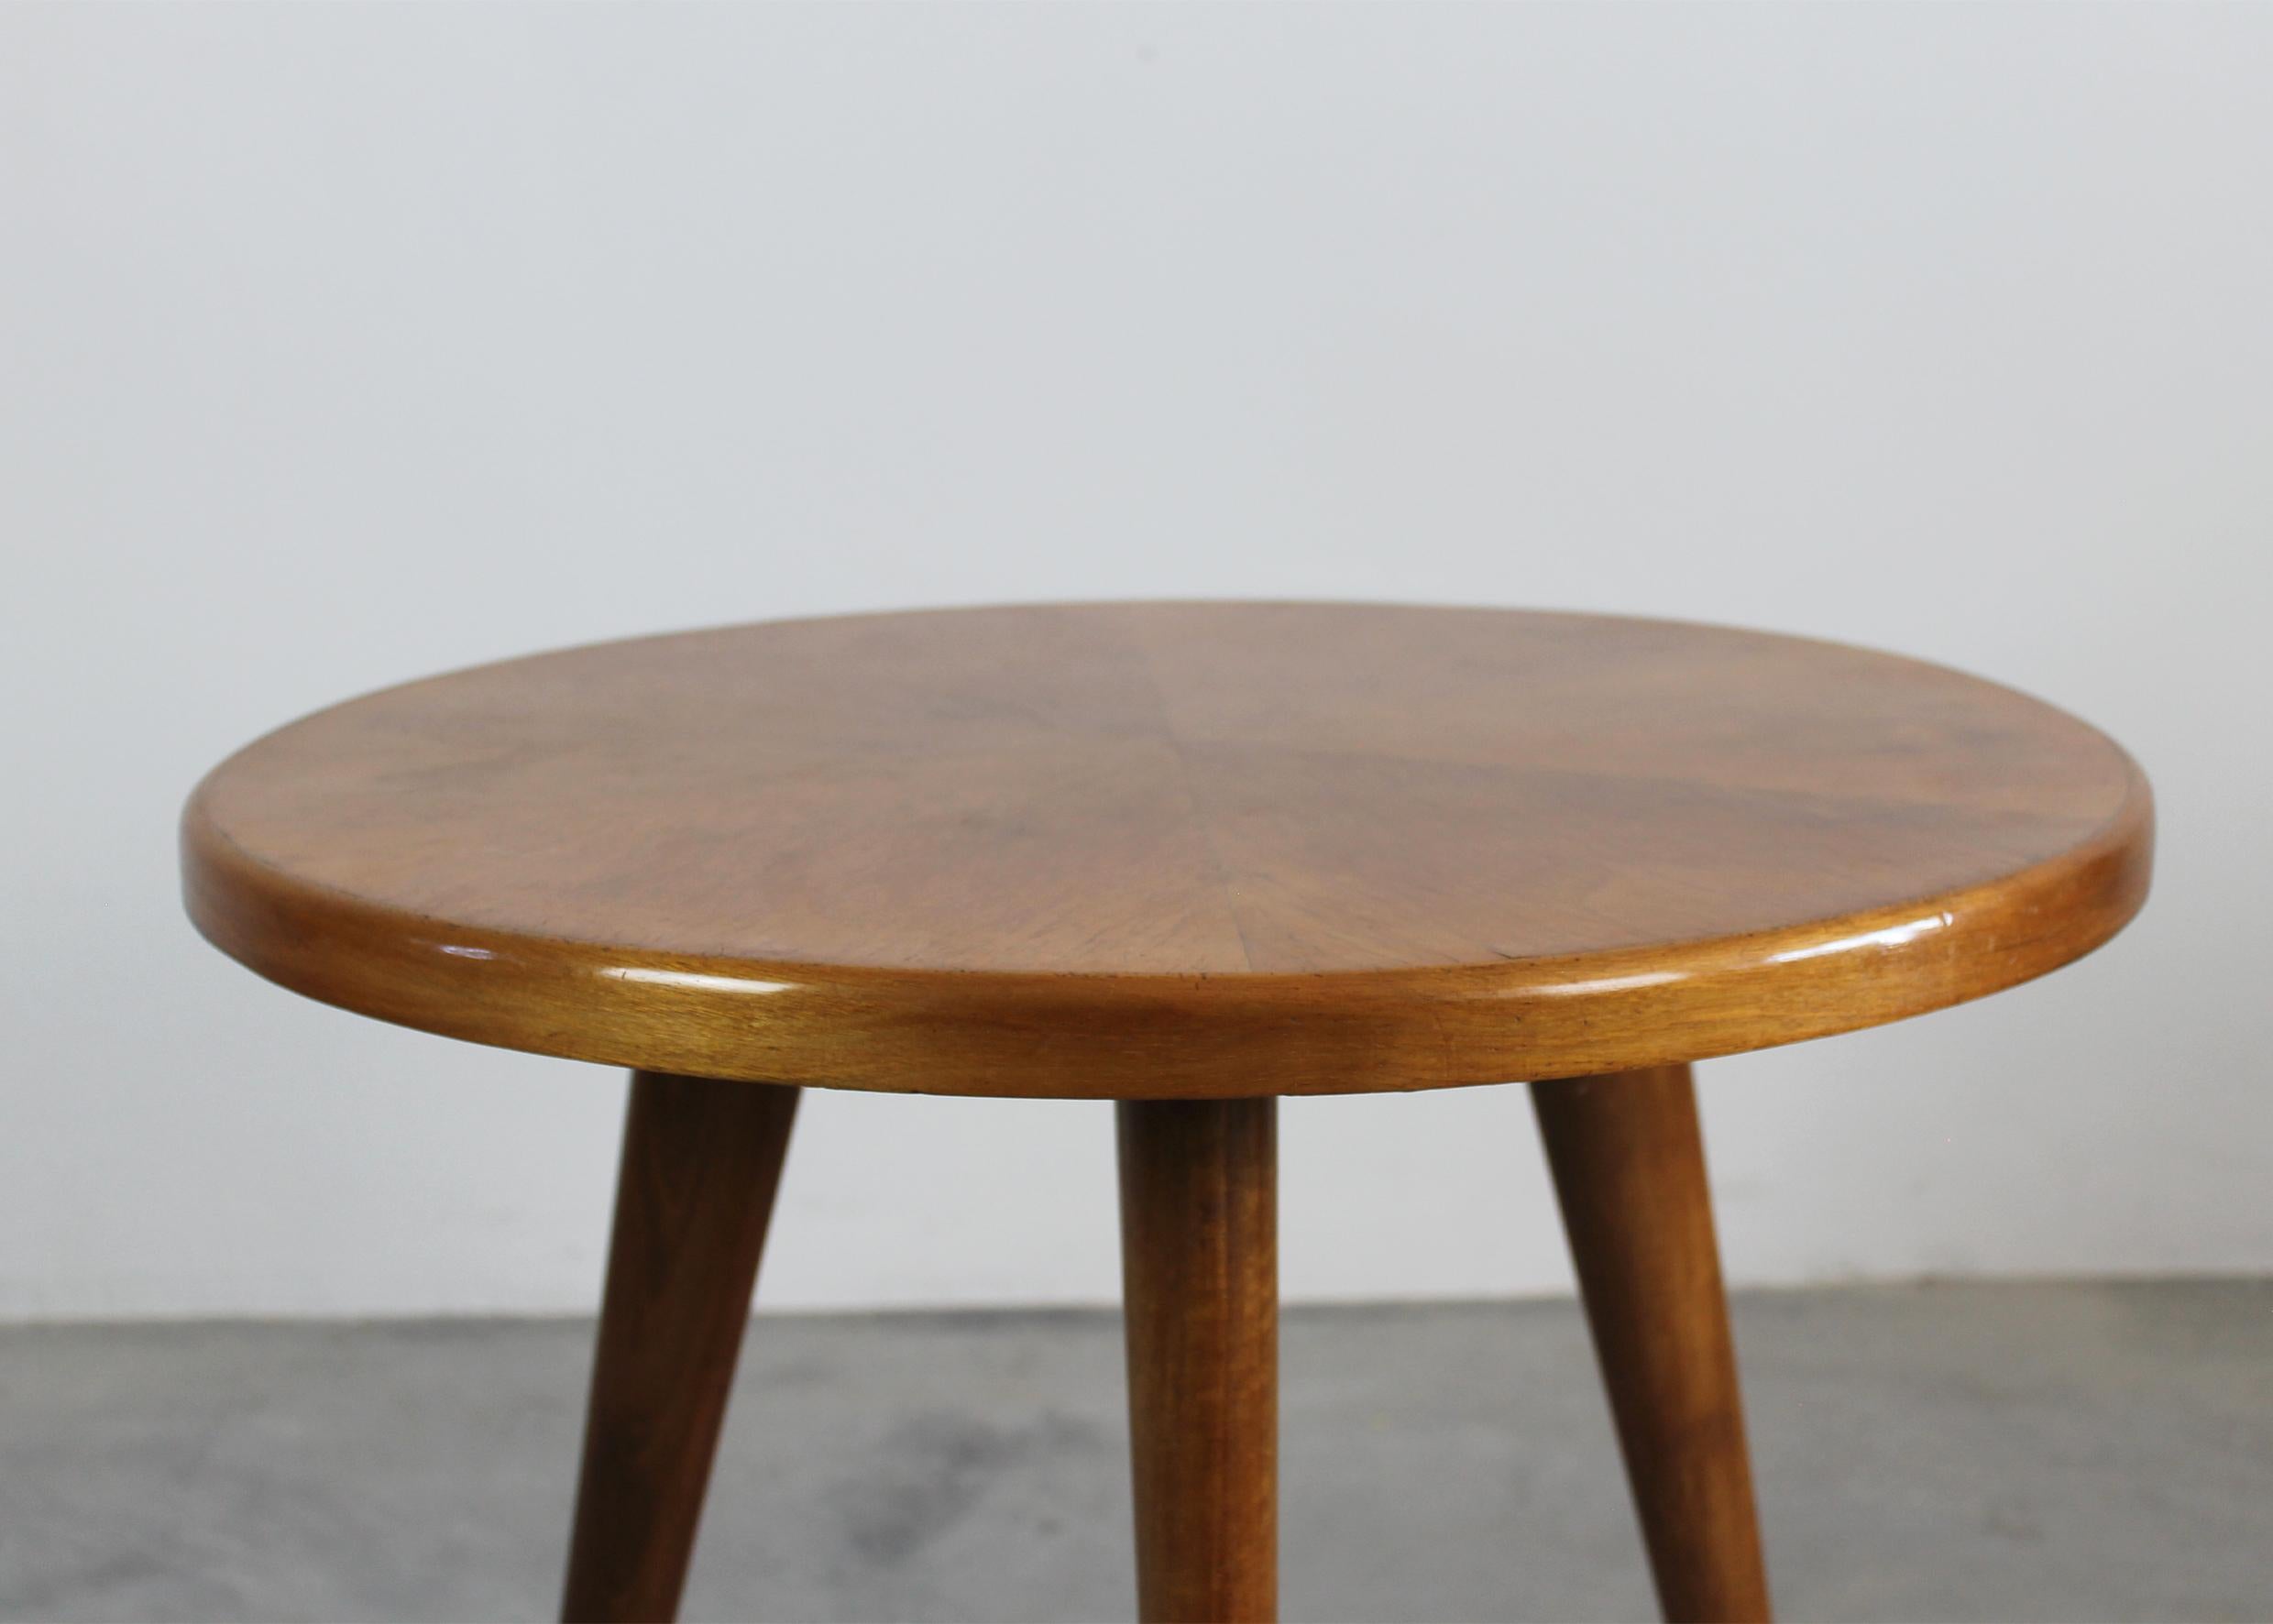 Other Gio Ponti Round Coffee Table in Walnut and Mahogany Italian Manufacture 1940s